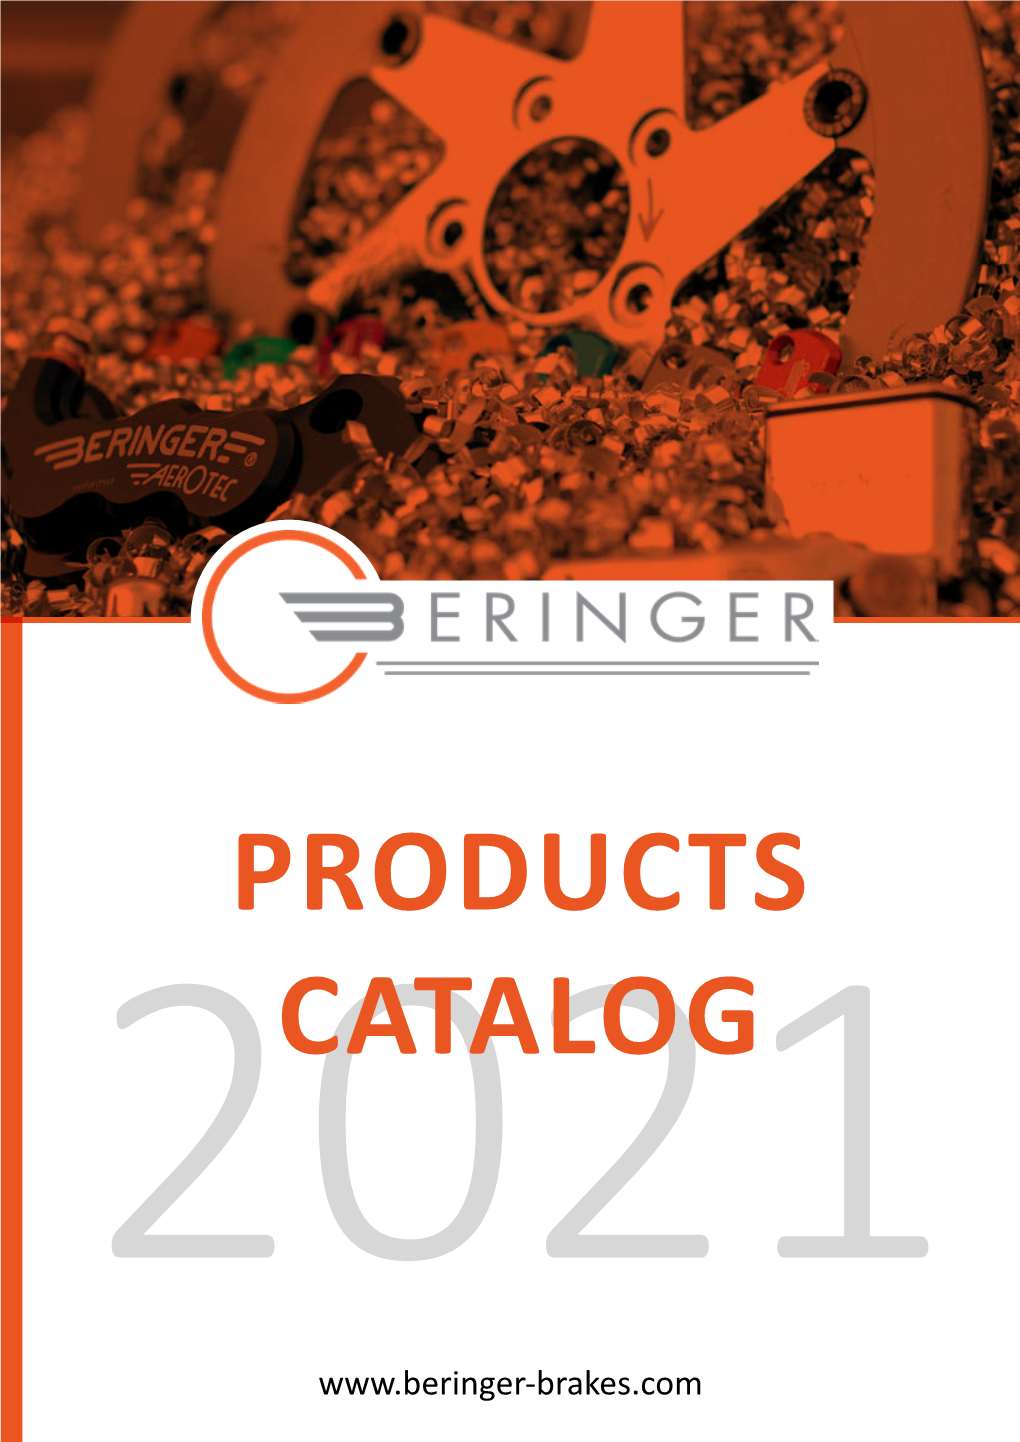 Products Catalog Beringer - 2020 Products Catalog 5 Aeronal® Patent 8 Technical Information: Choose Your Lever 9 Technical Information: Choose You Master Cylinder 10